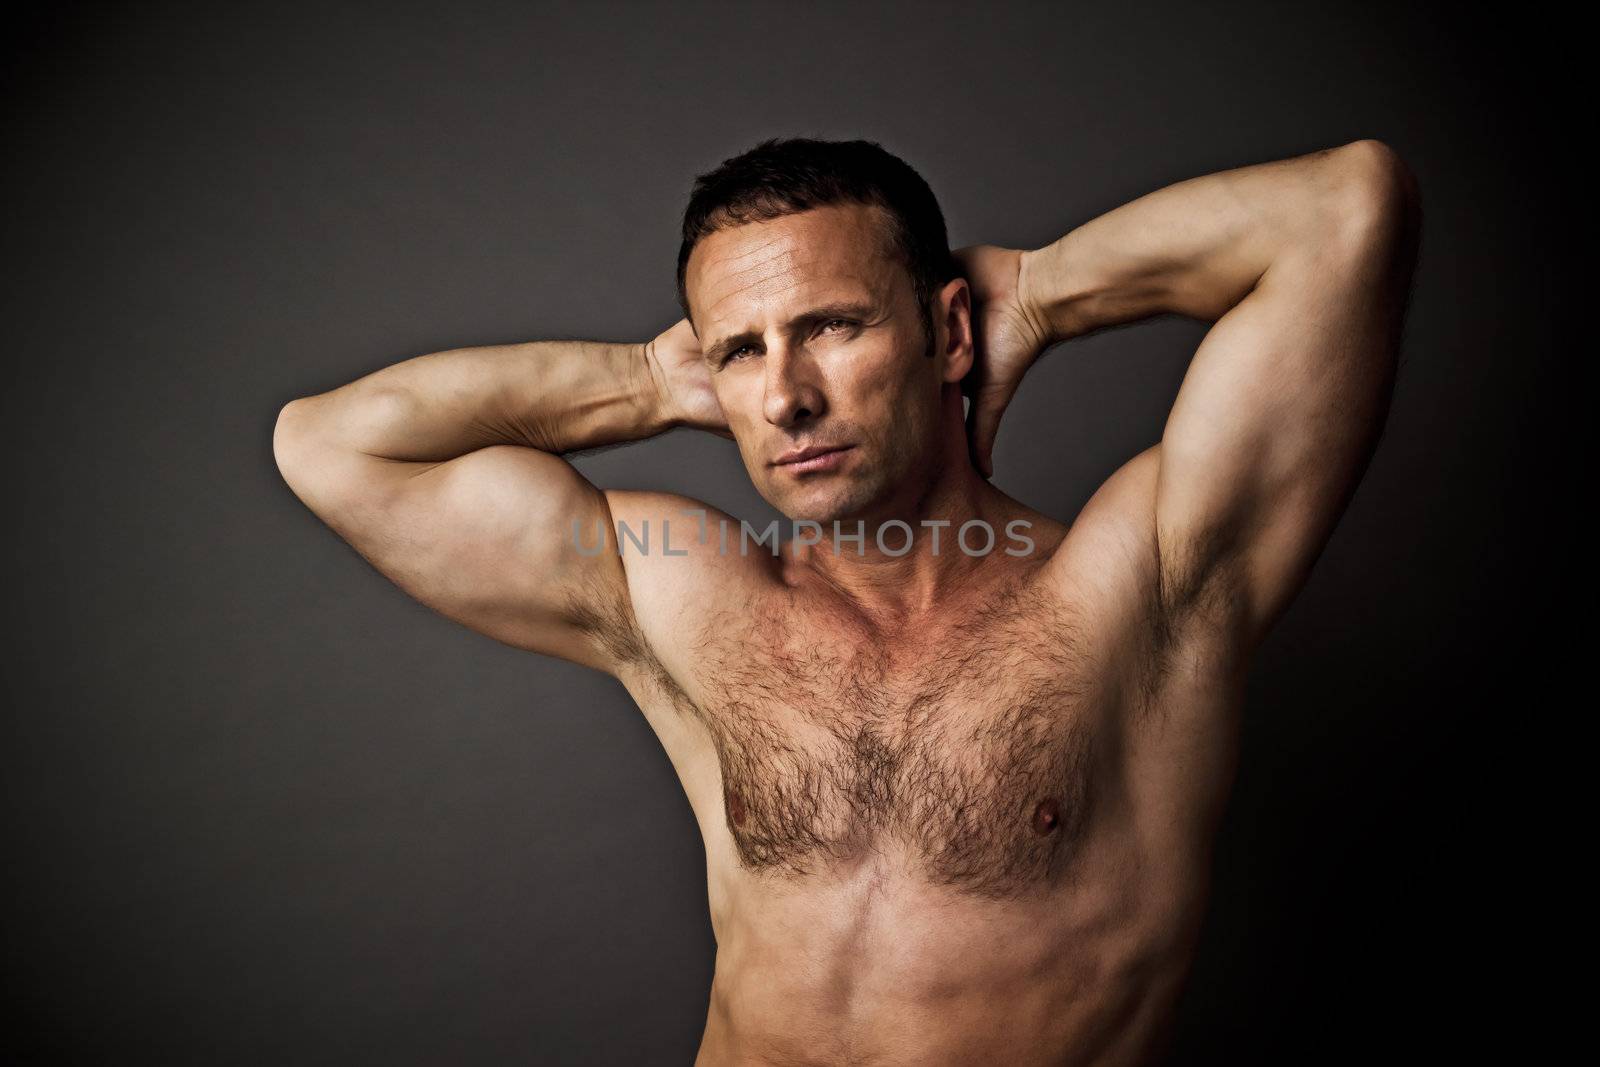 An image of a handsome muscle man